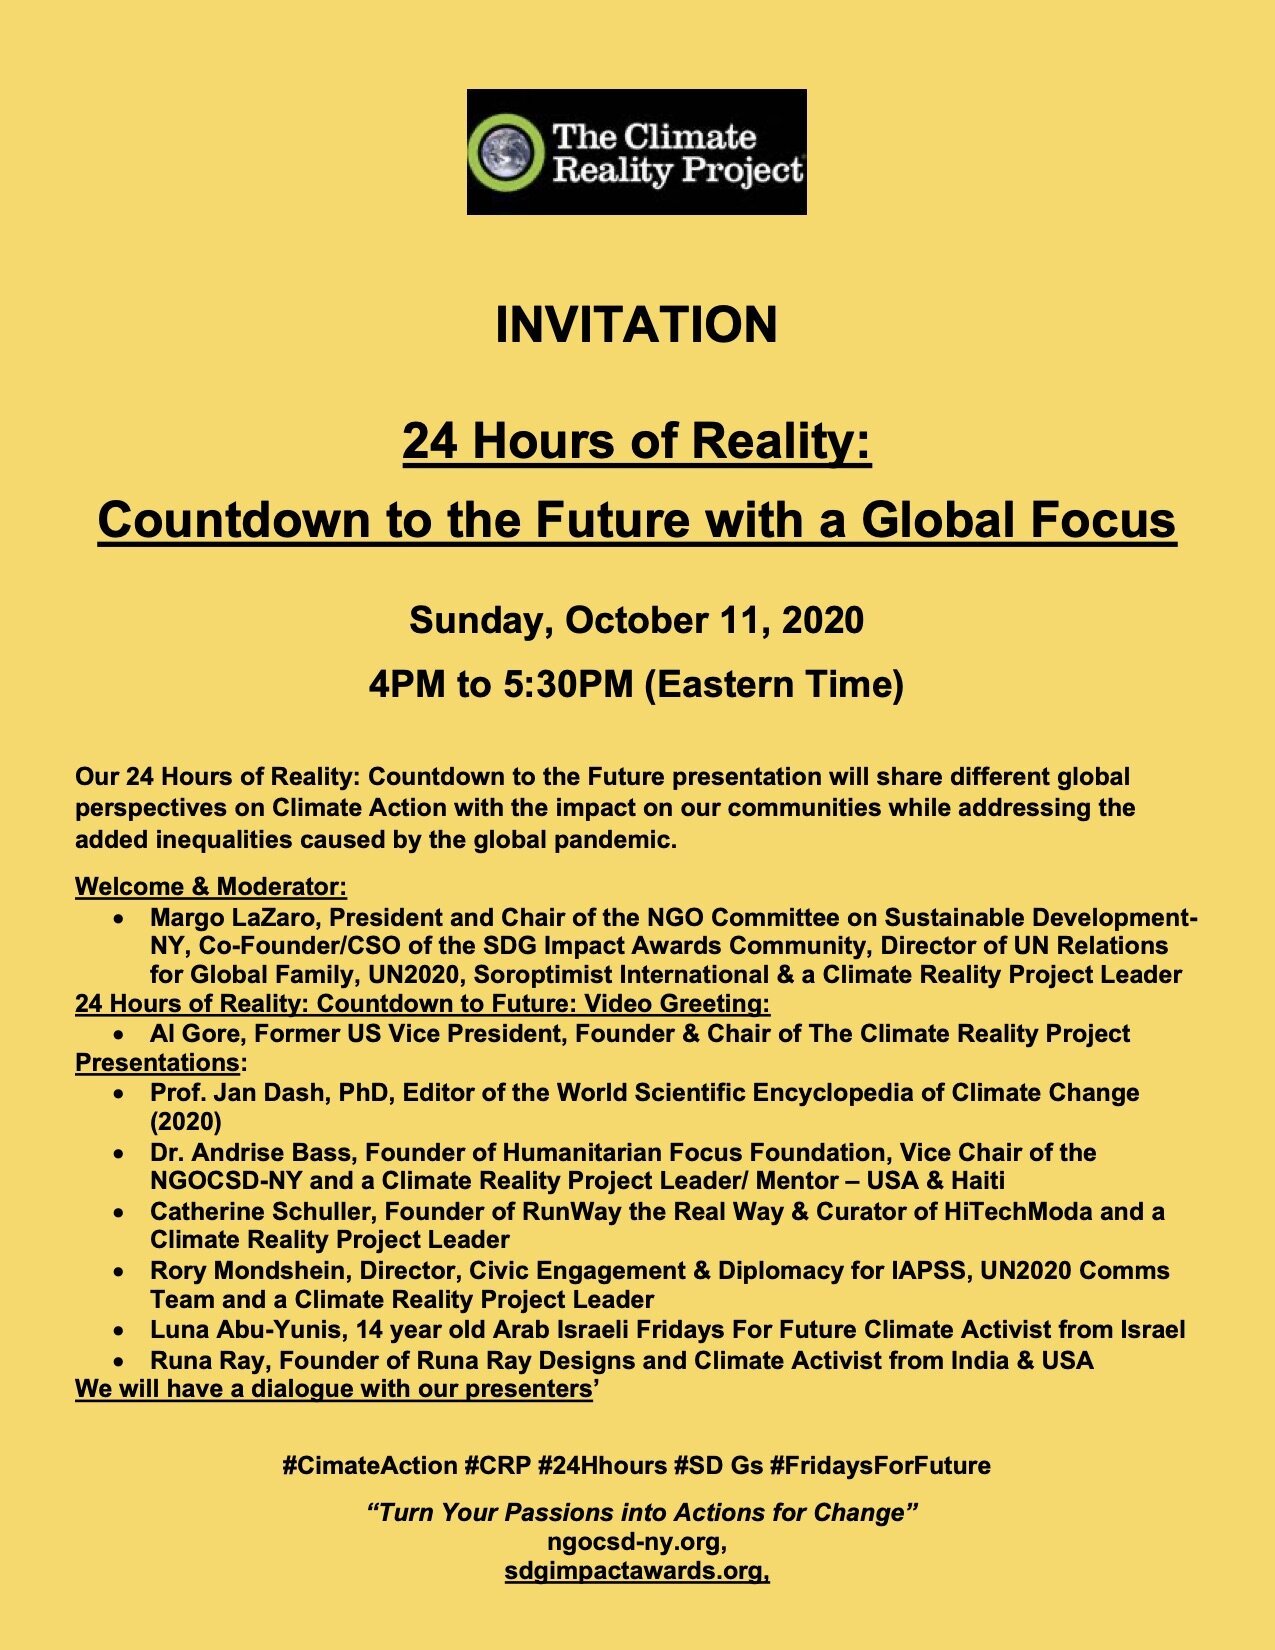 24+Hours+of+Reality+Countdown+to+the+Future+-+Invitation++10-11-2020+B1.jpg